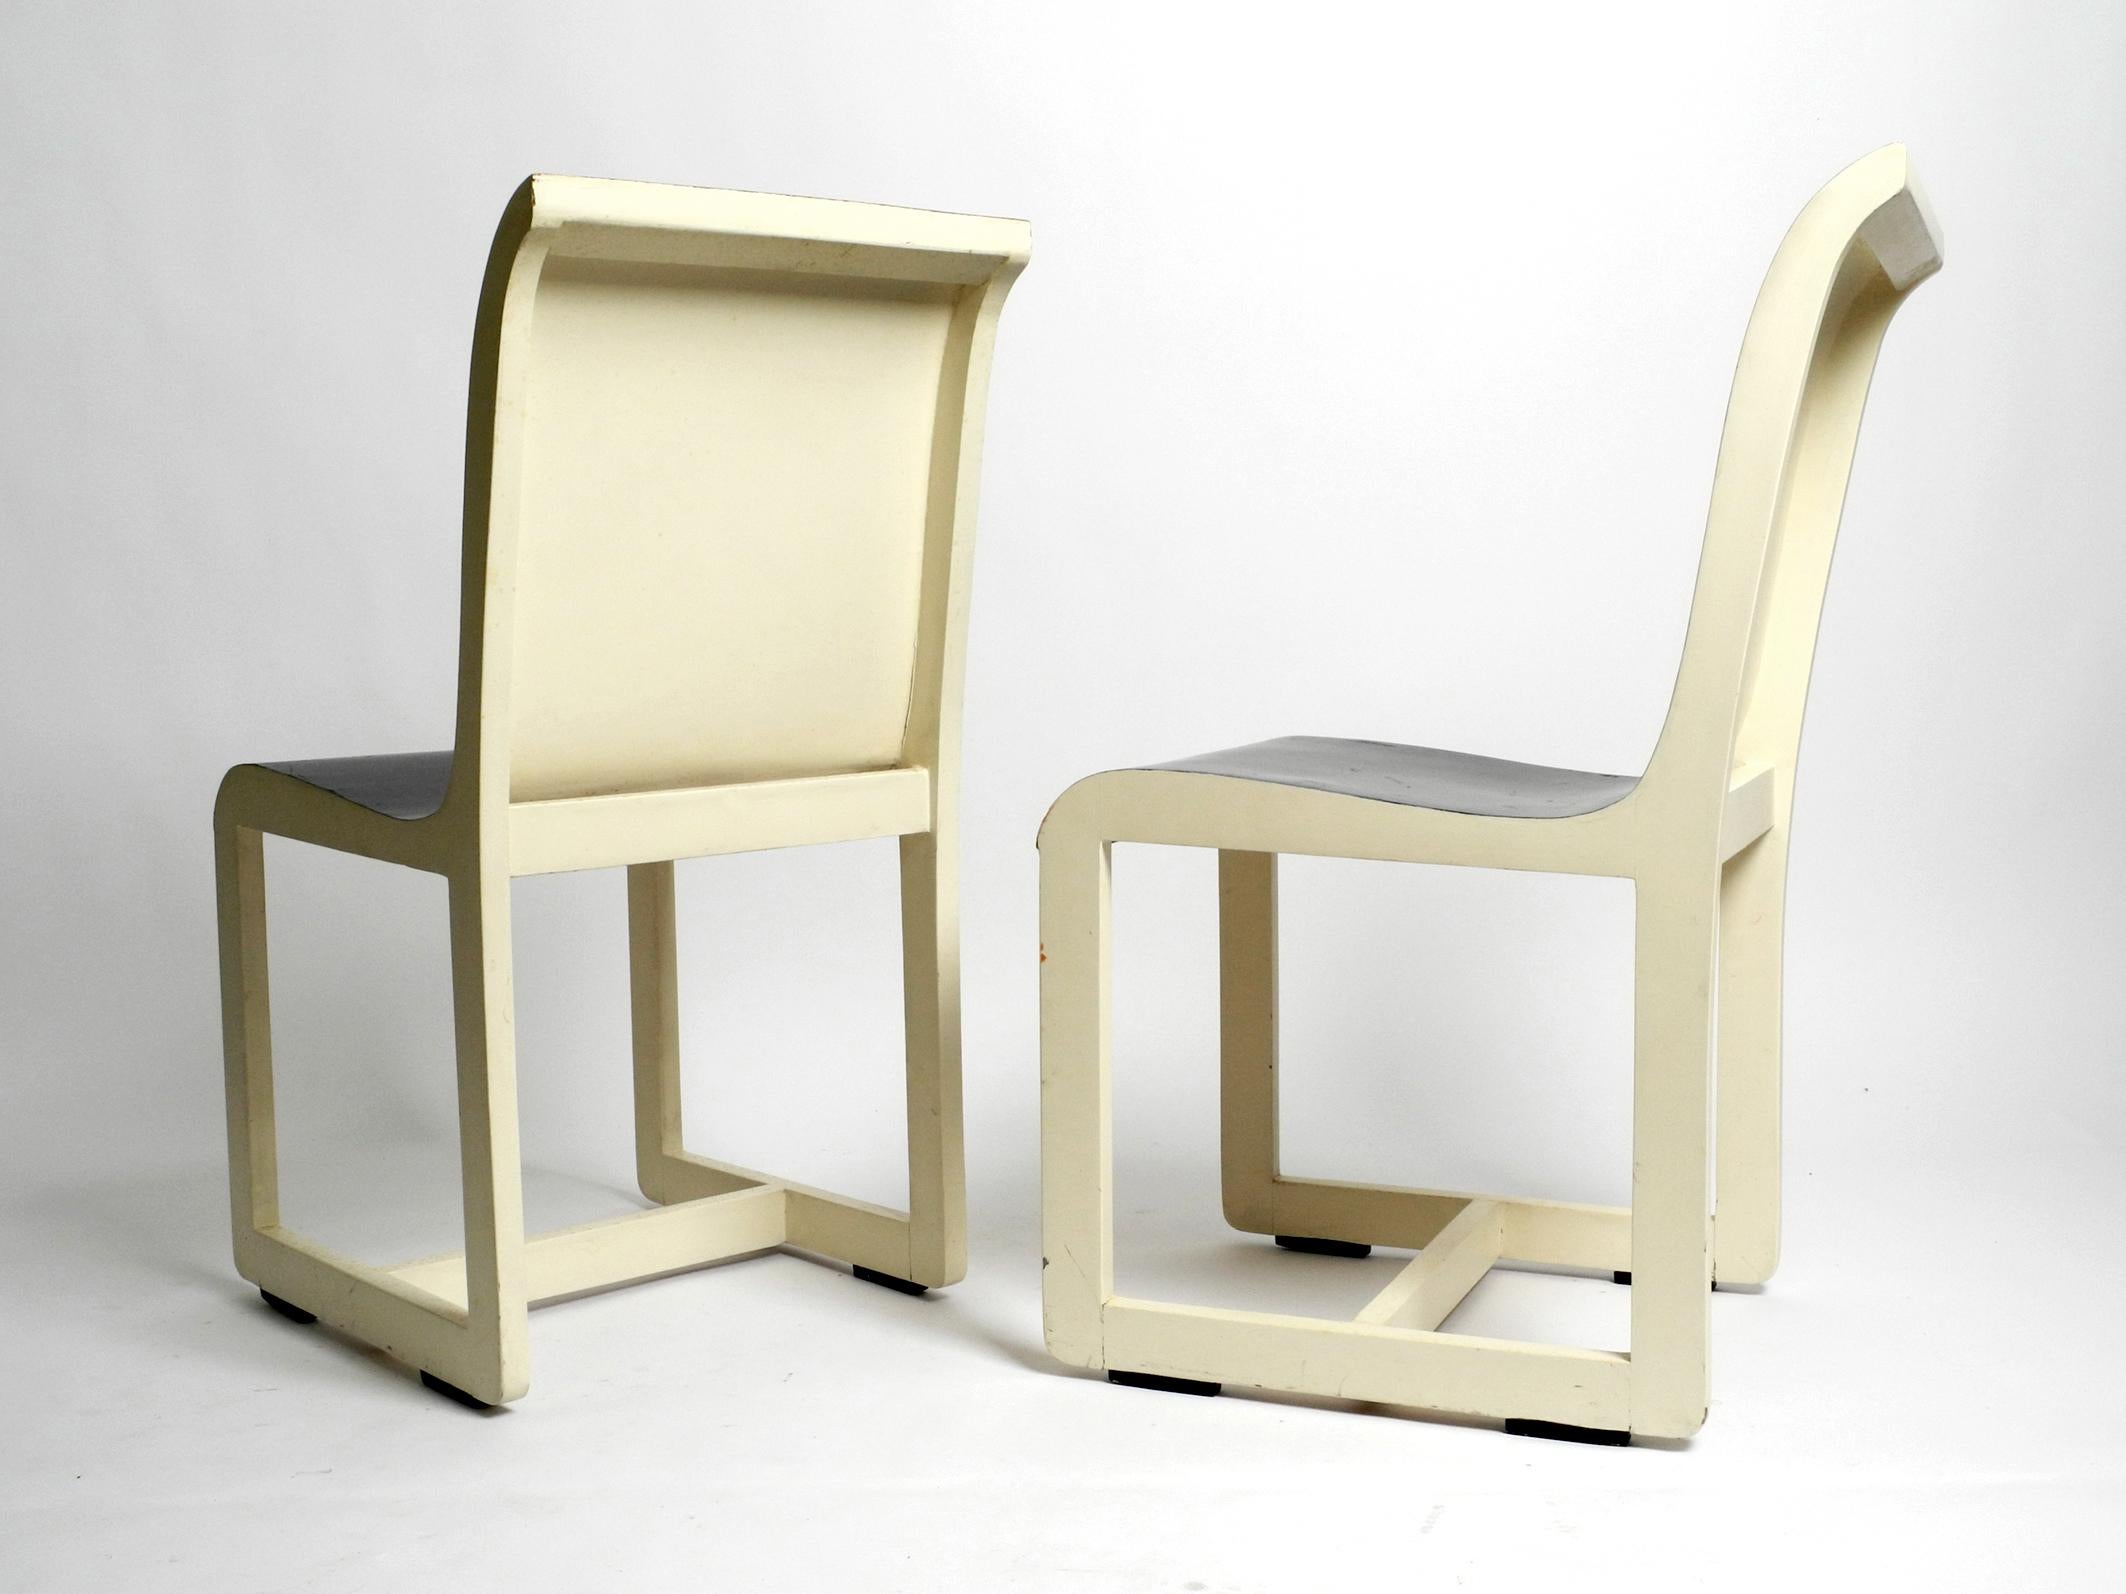 Ash Two original 1930s wooden chairs by the well-known Bauhaus student Peter Keler For Sale